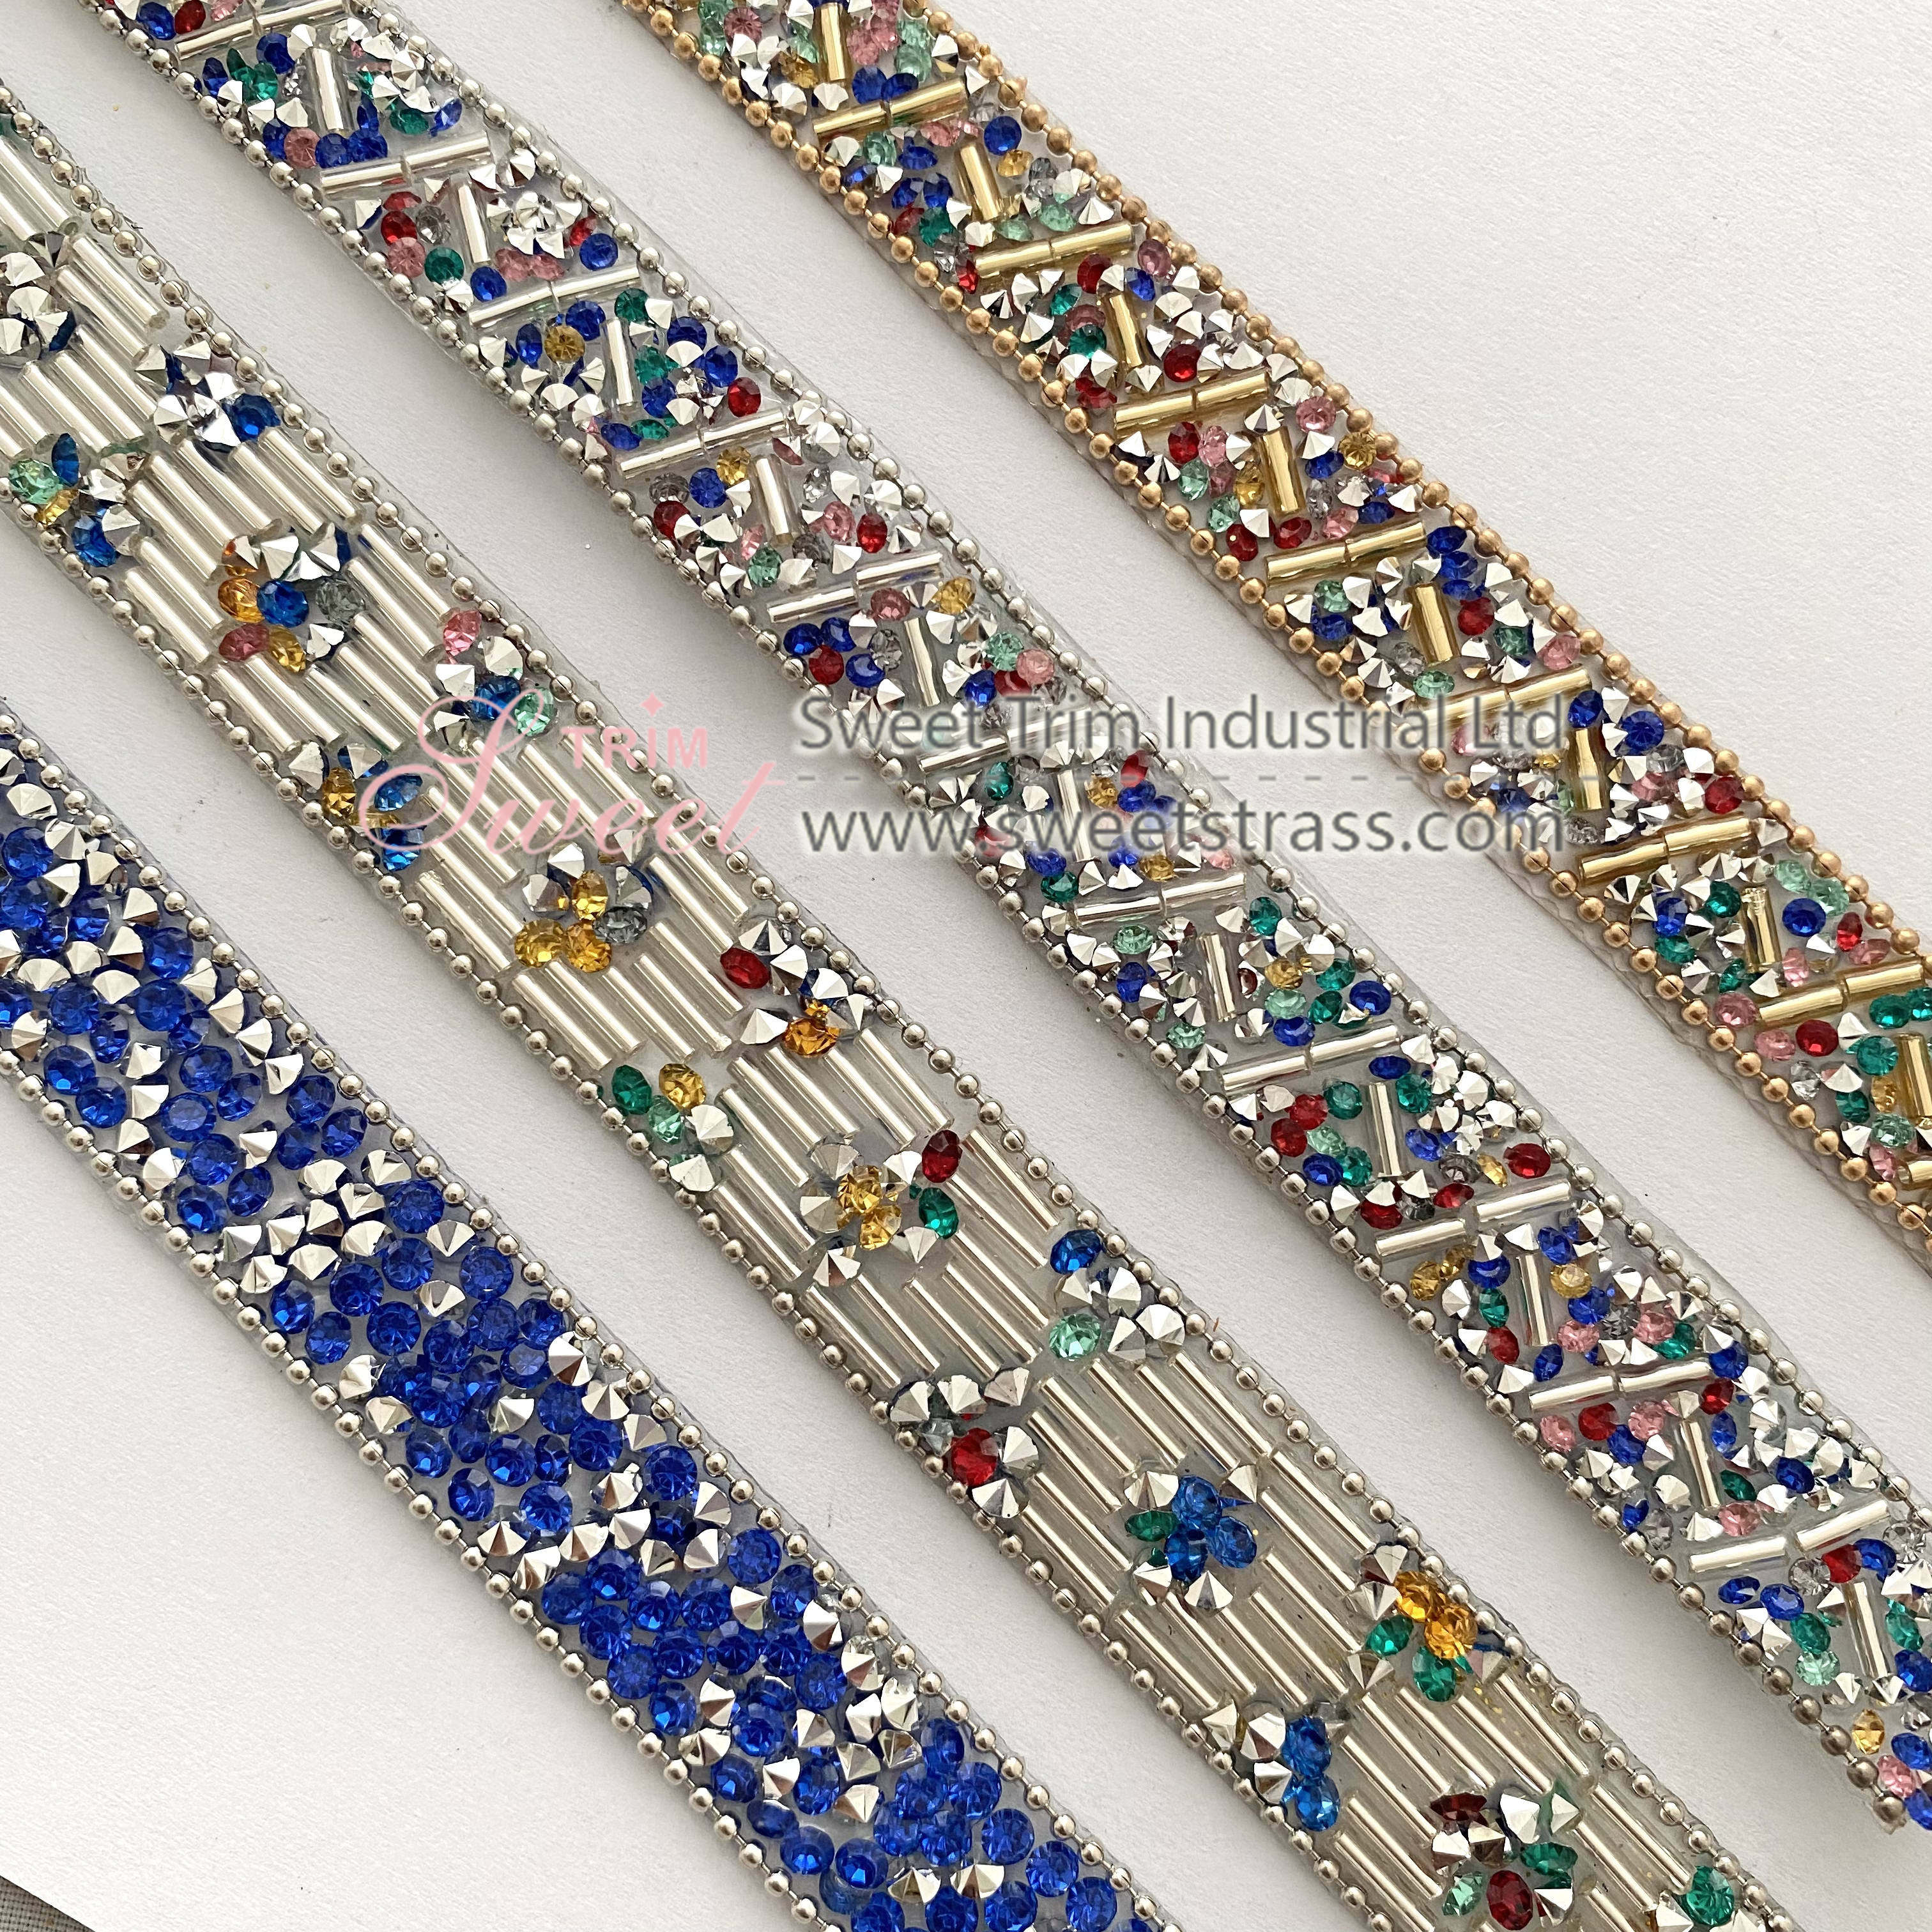 1.7cm Hotfix Rhinestones Trim Glitter Crystal Tape Strass Ribbon With Metal Chain Iron On Garments Shoes Diy Crafts Decorations